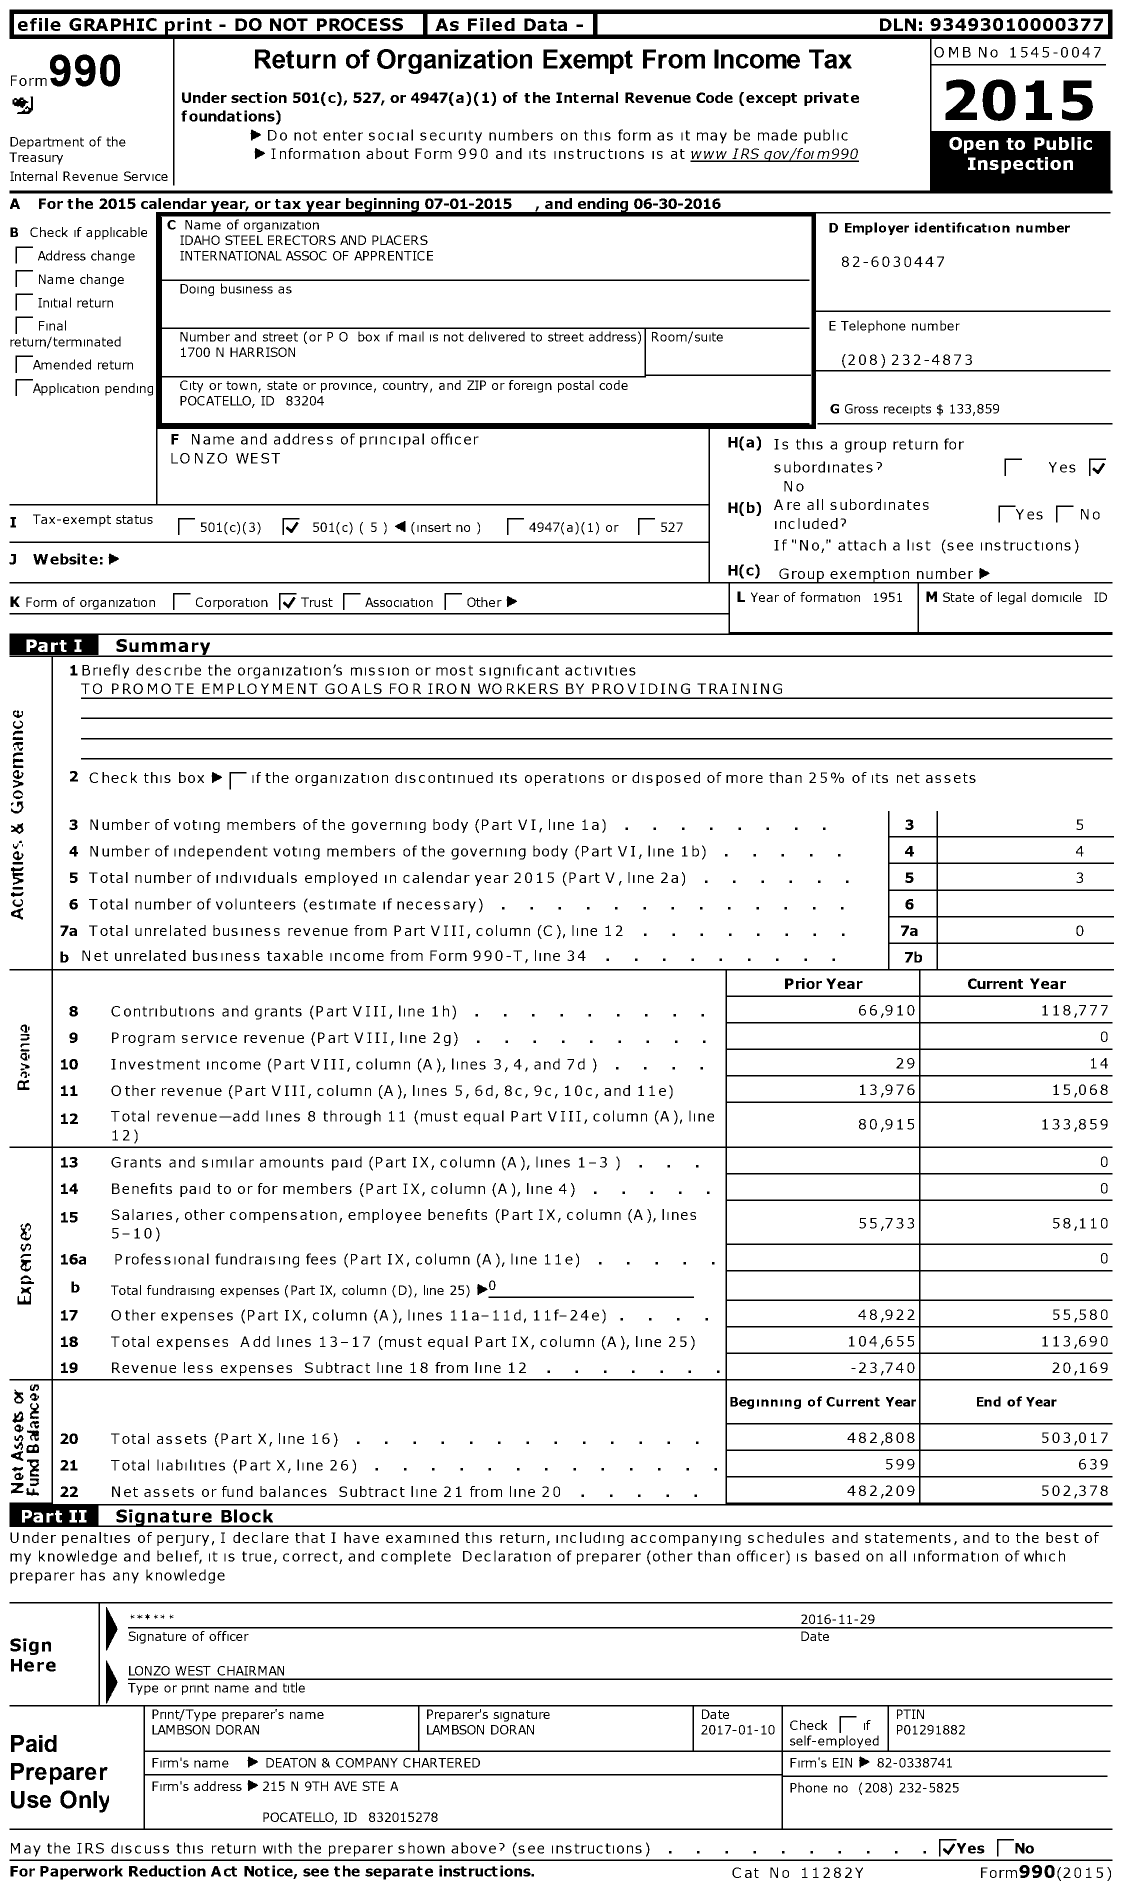 Image of first page of 2015 Form 990O for Idaho Steel Erectors and Placers International Association of Apprentice